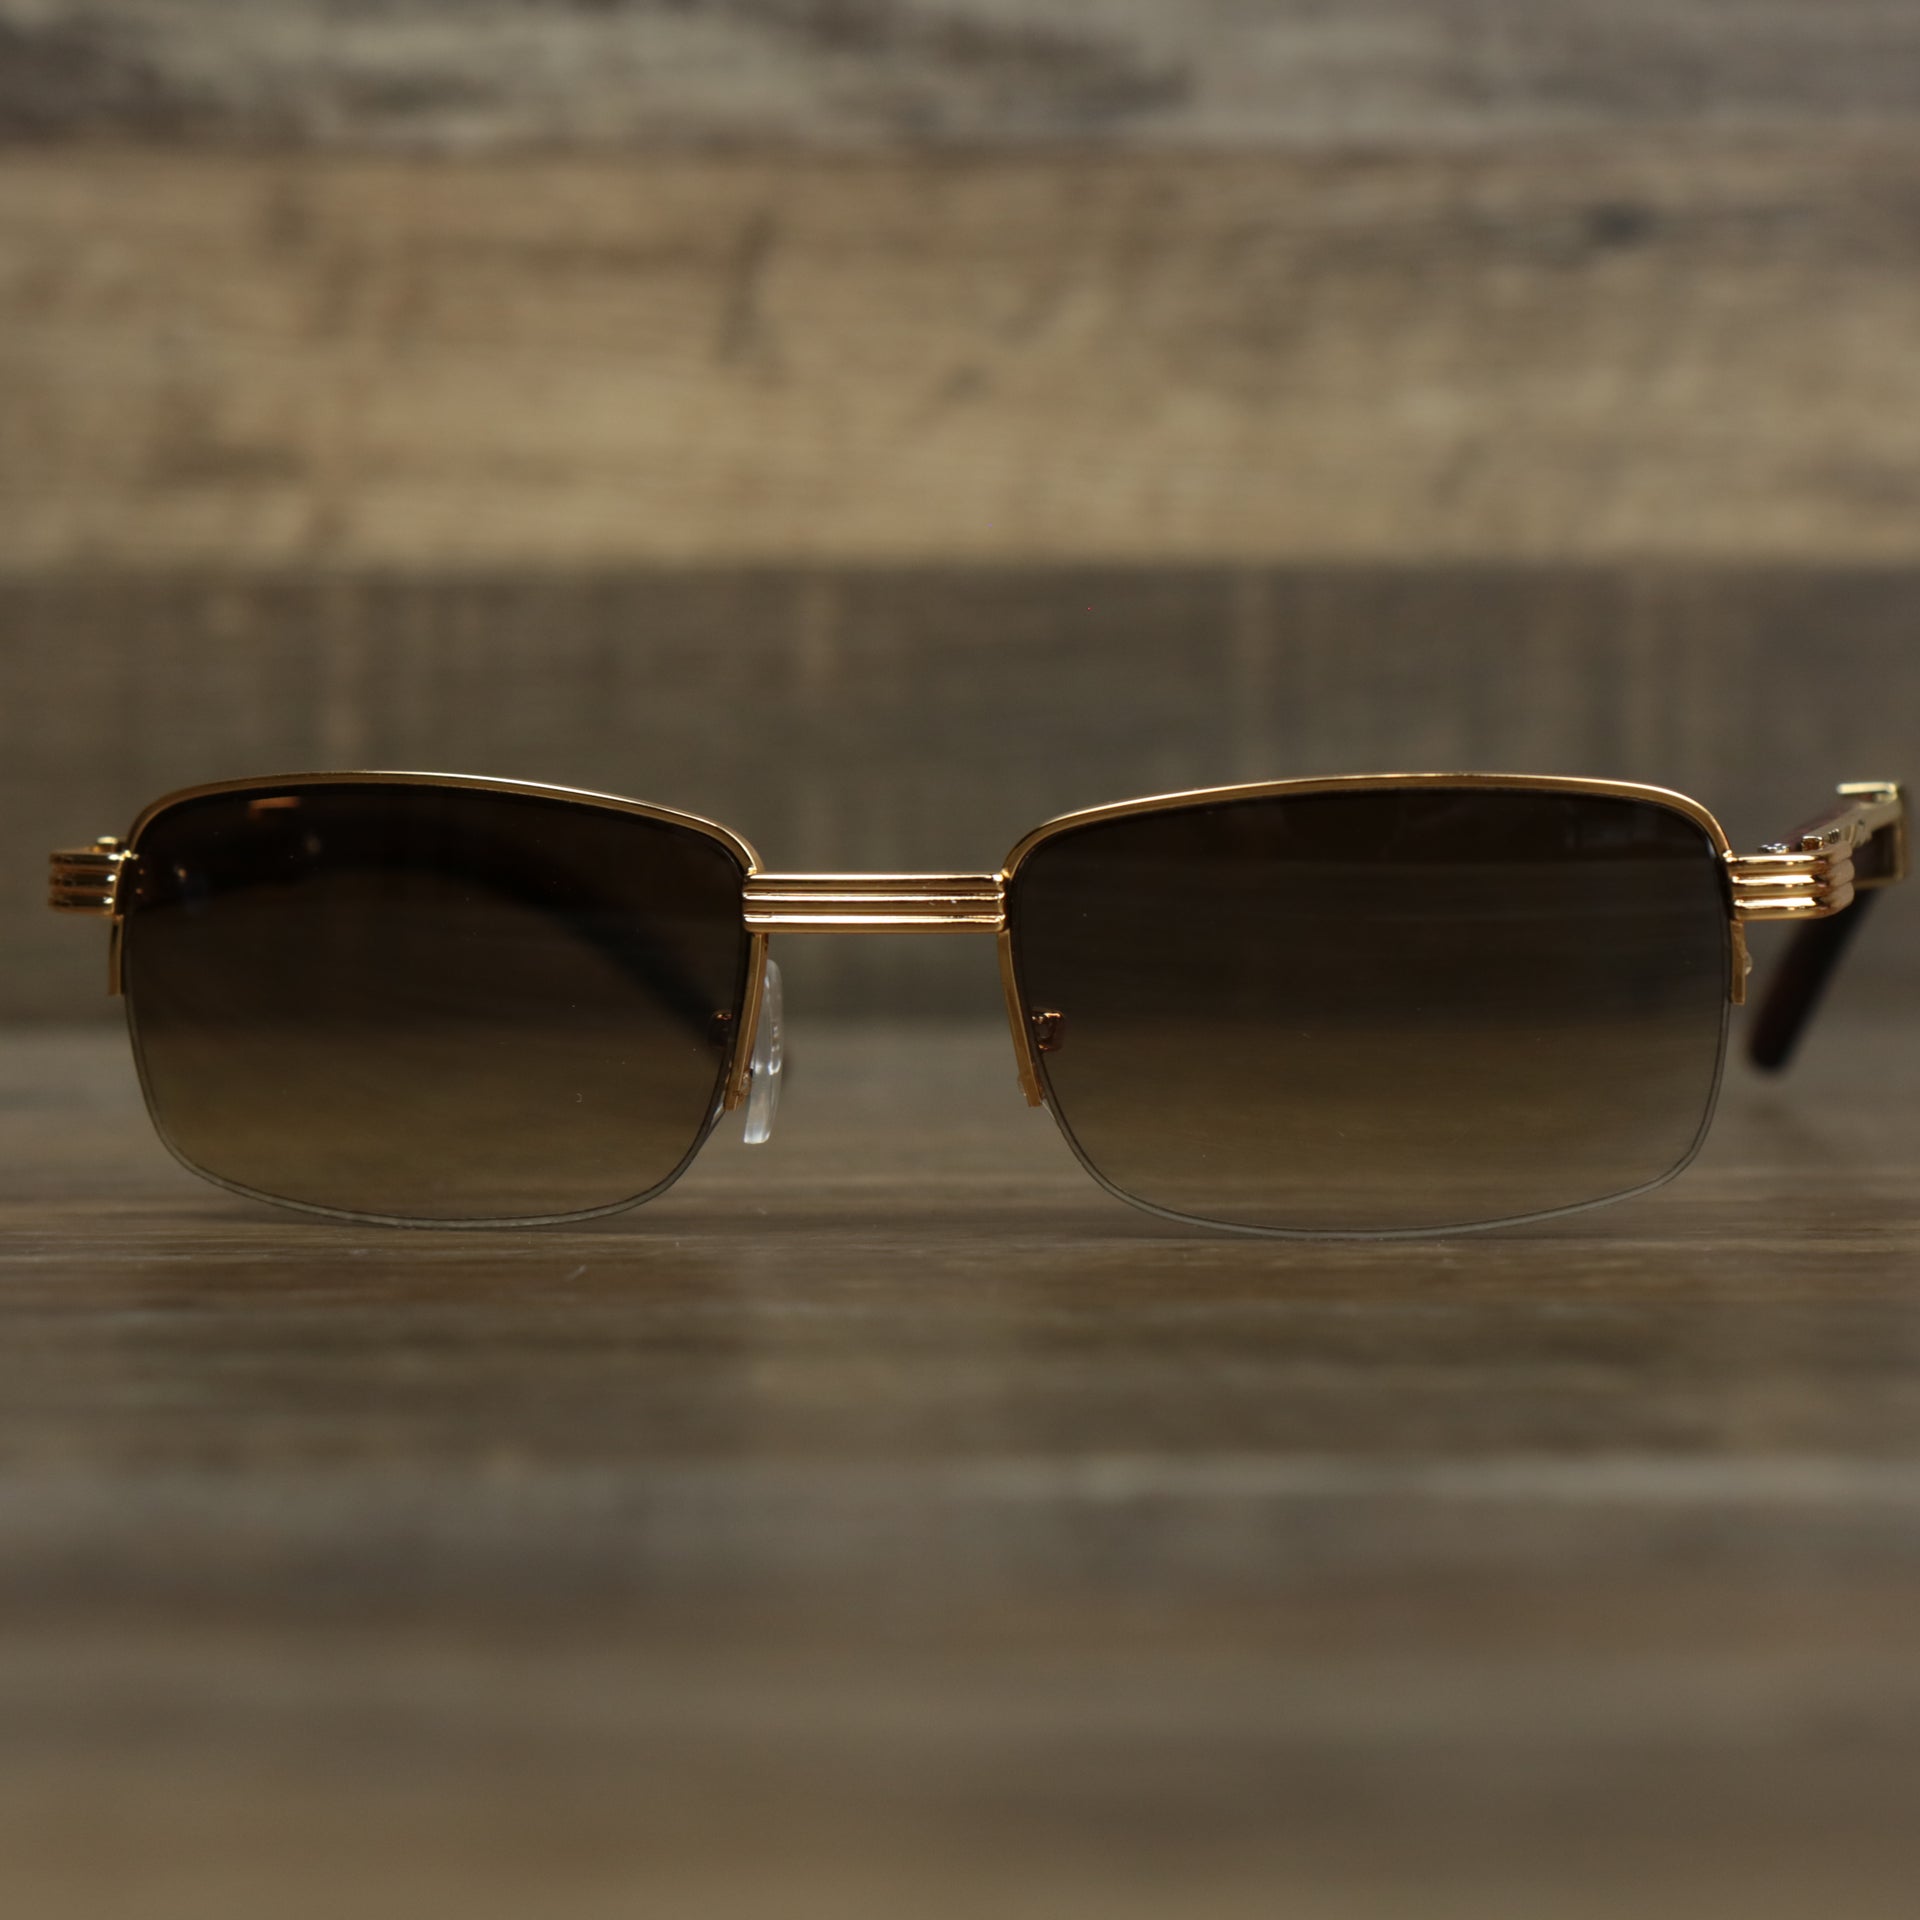 The Rectangle 3 Row Frame Brown Gradient Lens Sunglasses with Gold Frame